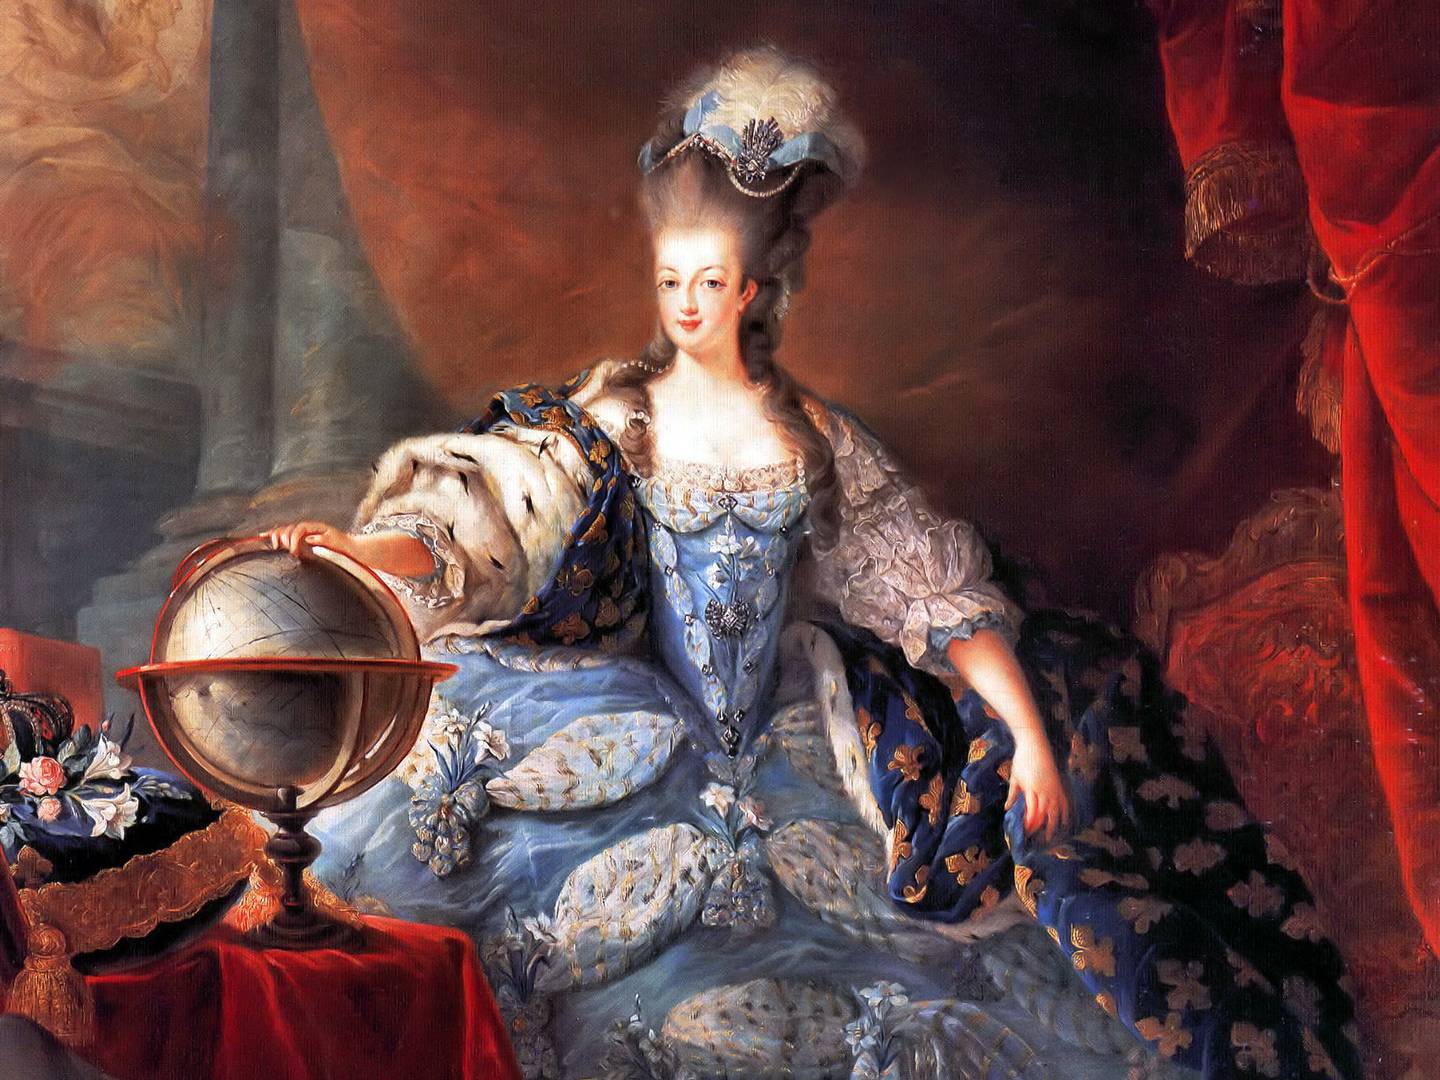 Marie-Antoinette, the last queen of France before the revolution, was executed in Paris in October 1793, aged 37. Getty Images